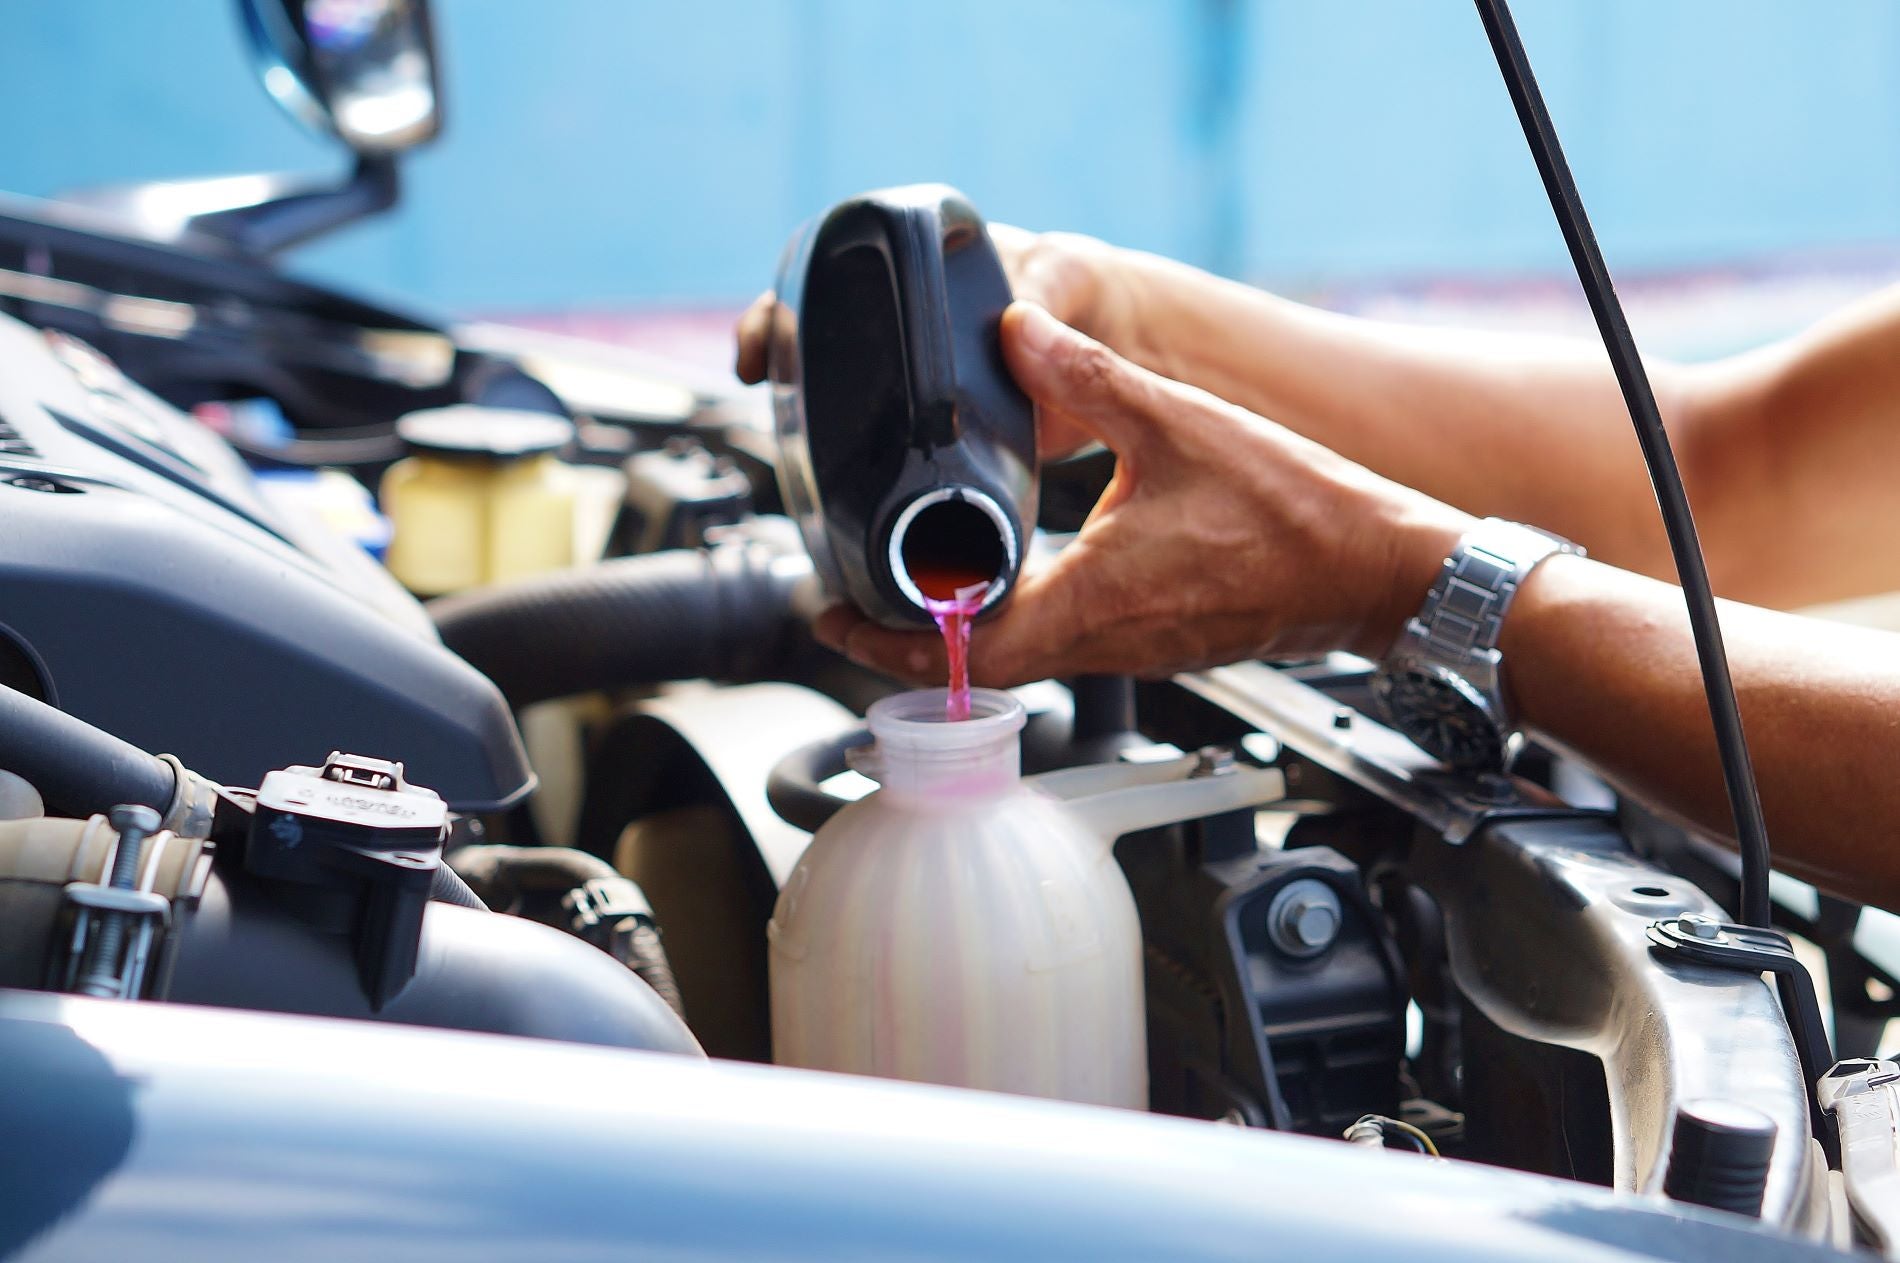 Mechanic Adding OAT coolants and antifreeze protection to prevent engine overheat.